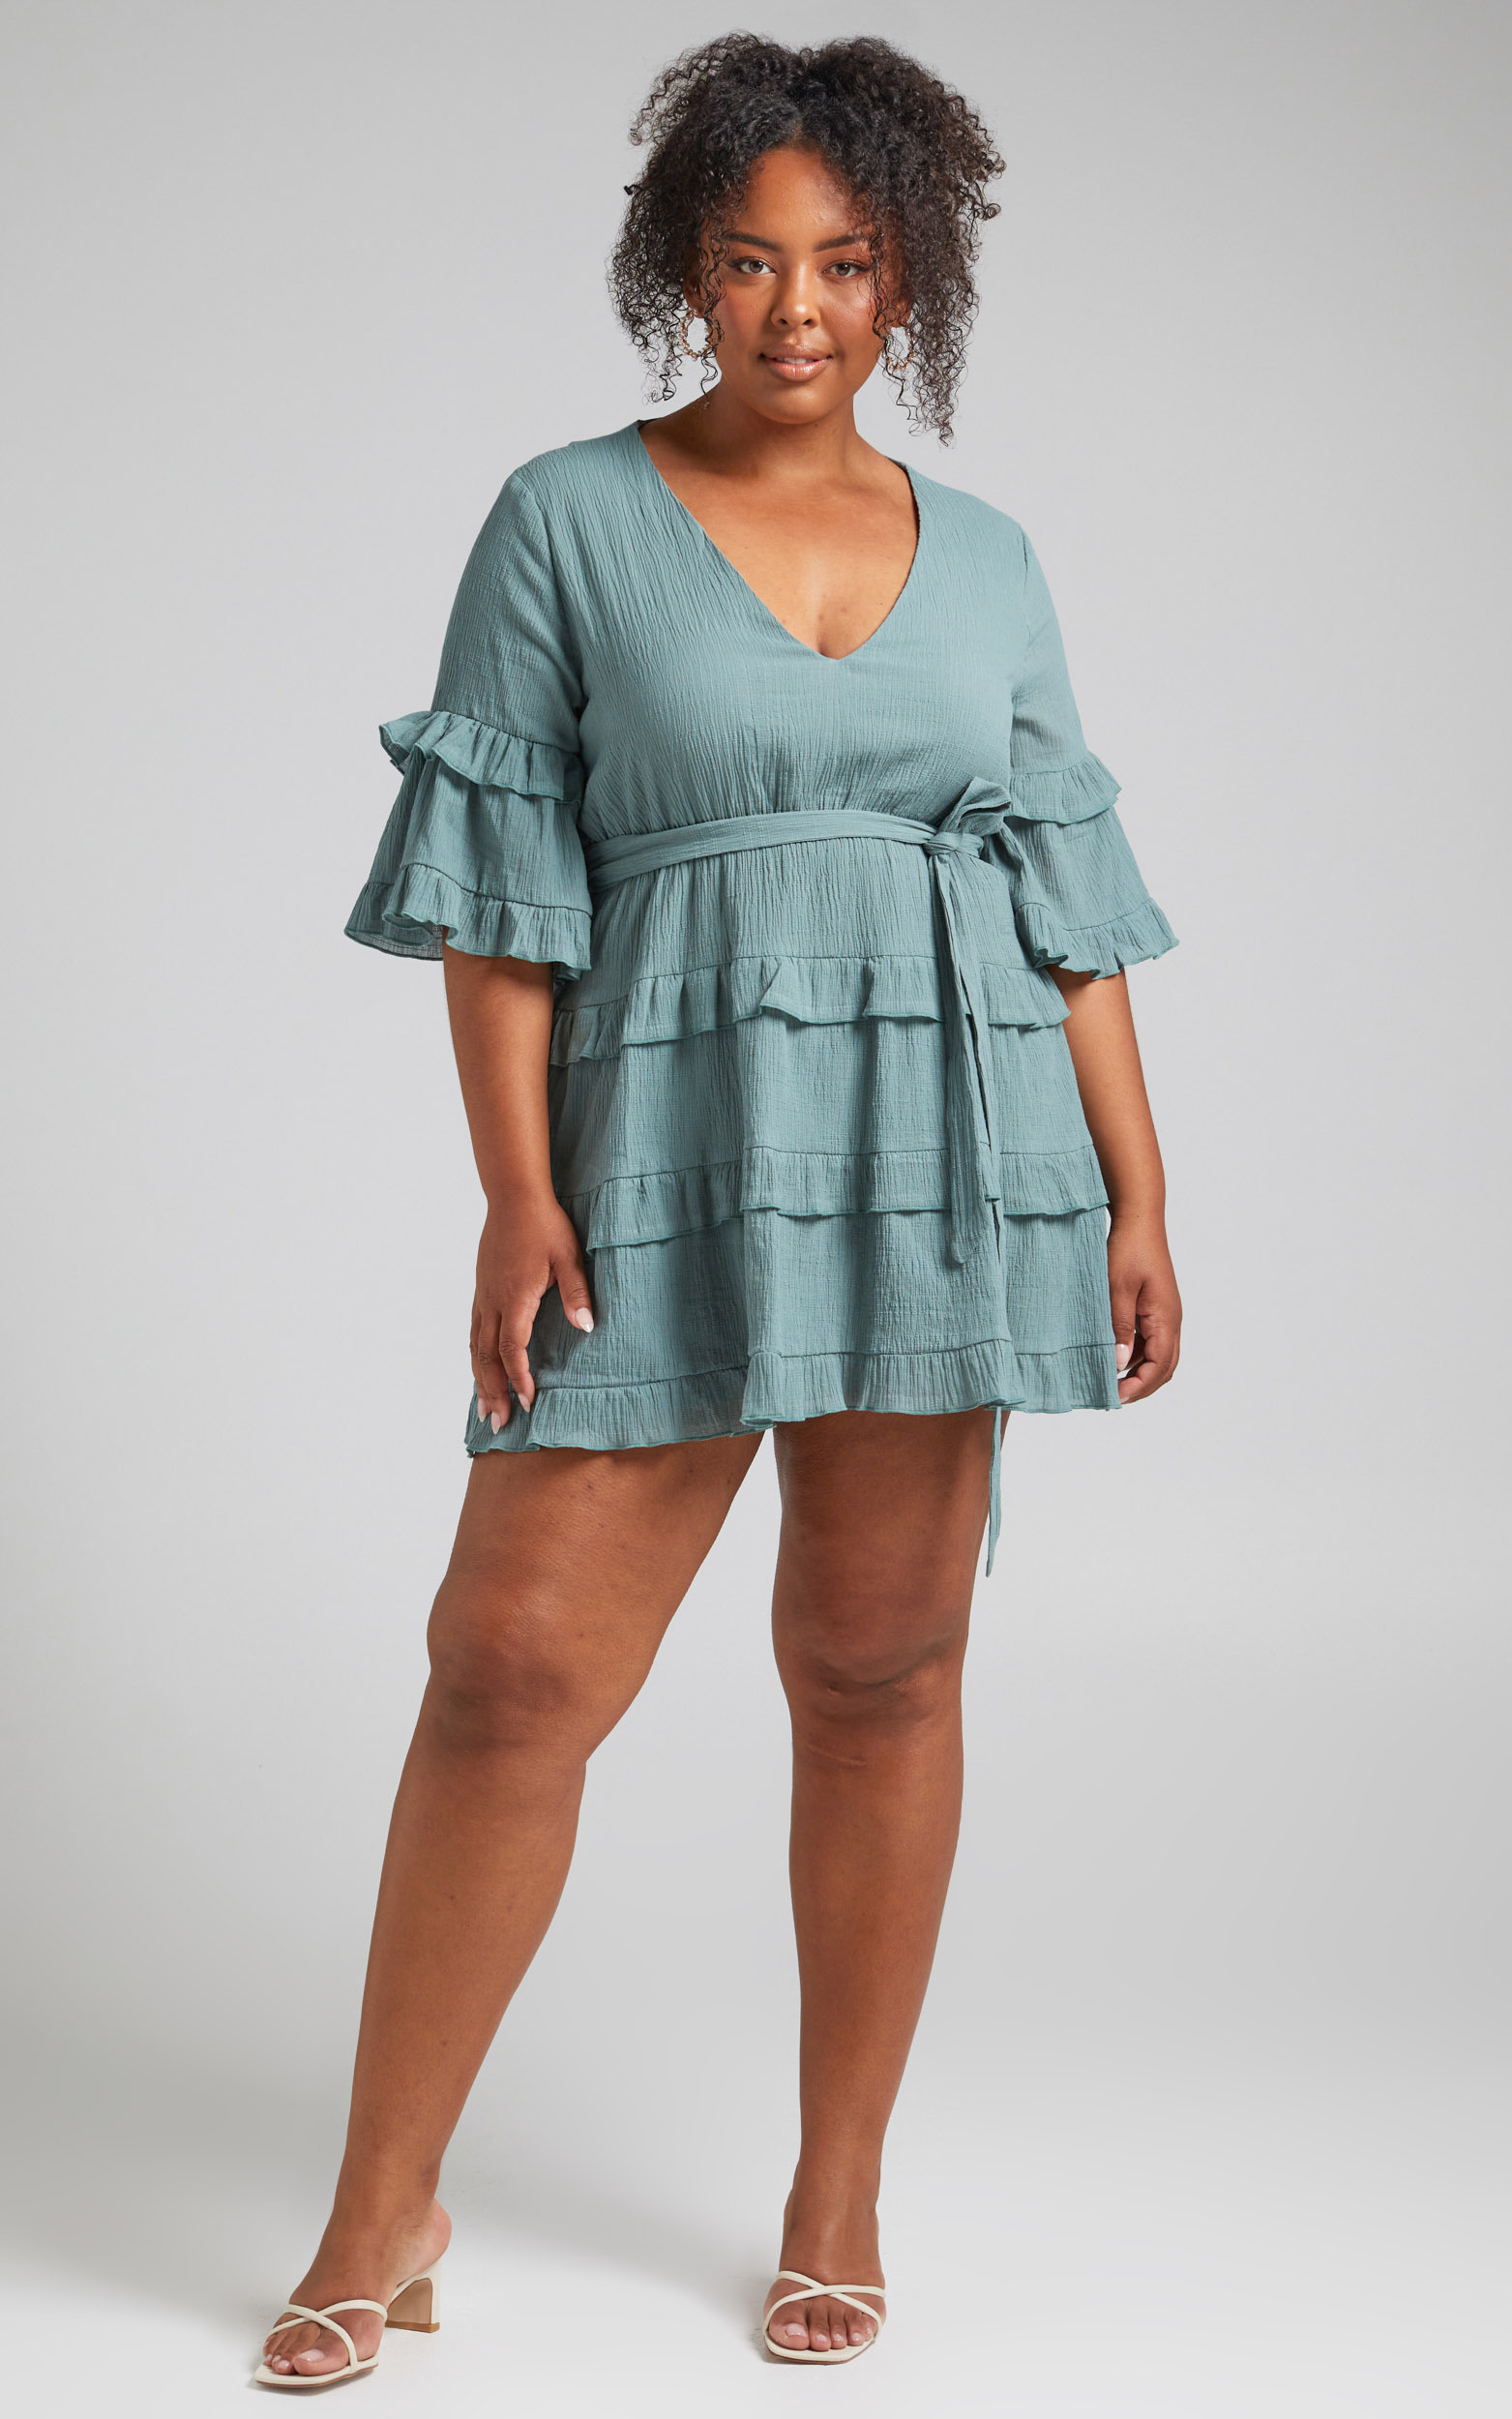 Meet Me In The Sun Tie Waist Tiered Mini Dress in Sage - 04, GRN4, hi-res image number null